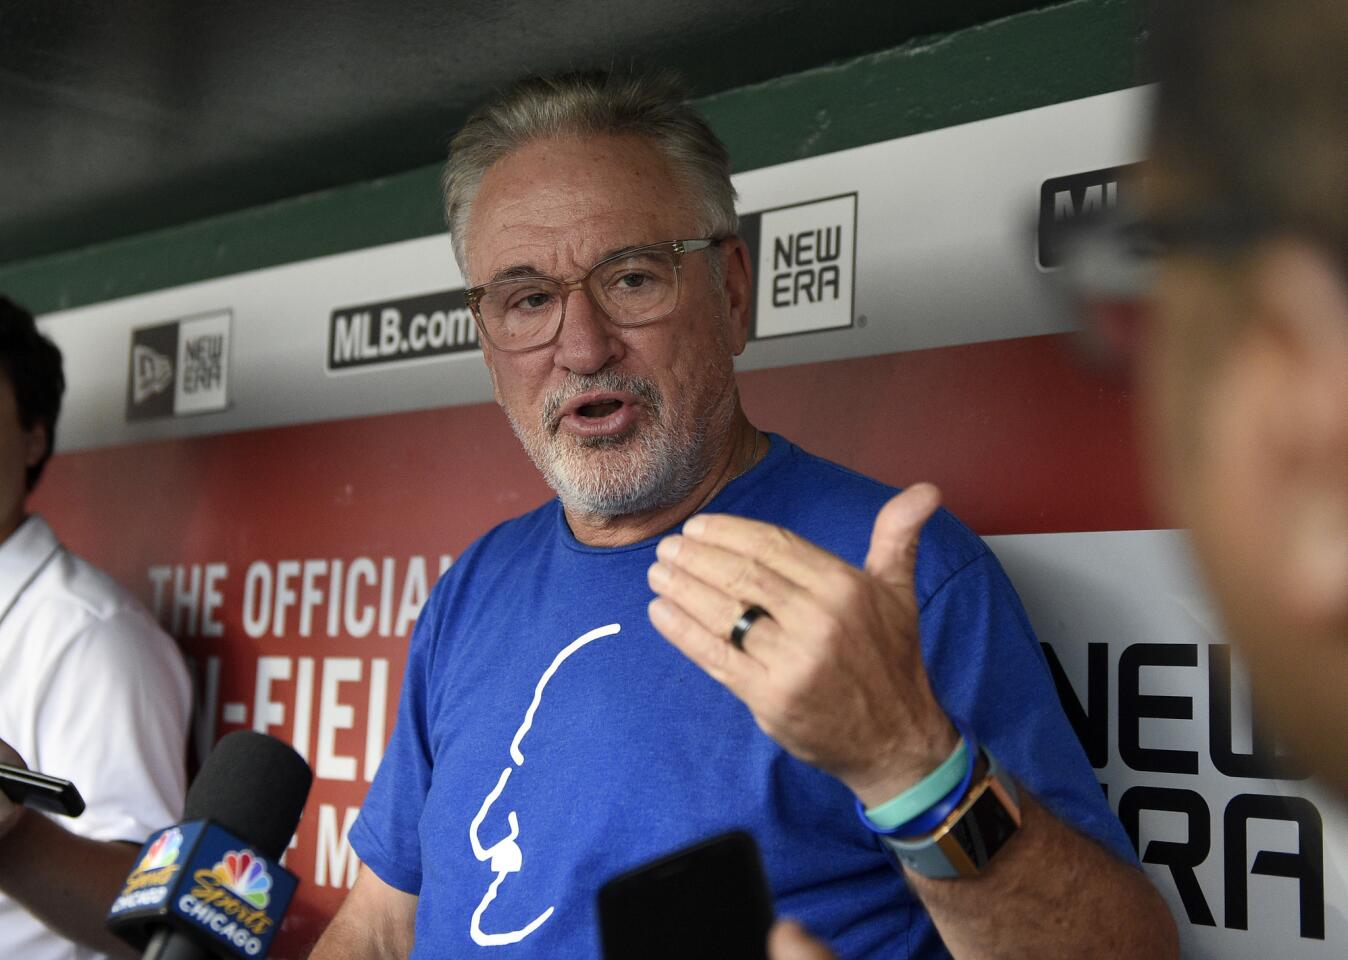 Cubs manager Joe Maddon talks to the media in the dugout before a game against the Nationals, Friday, Sept. 7, 2018, in Washington.